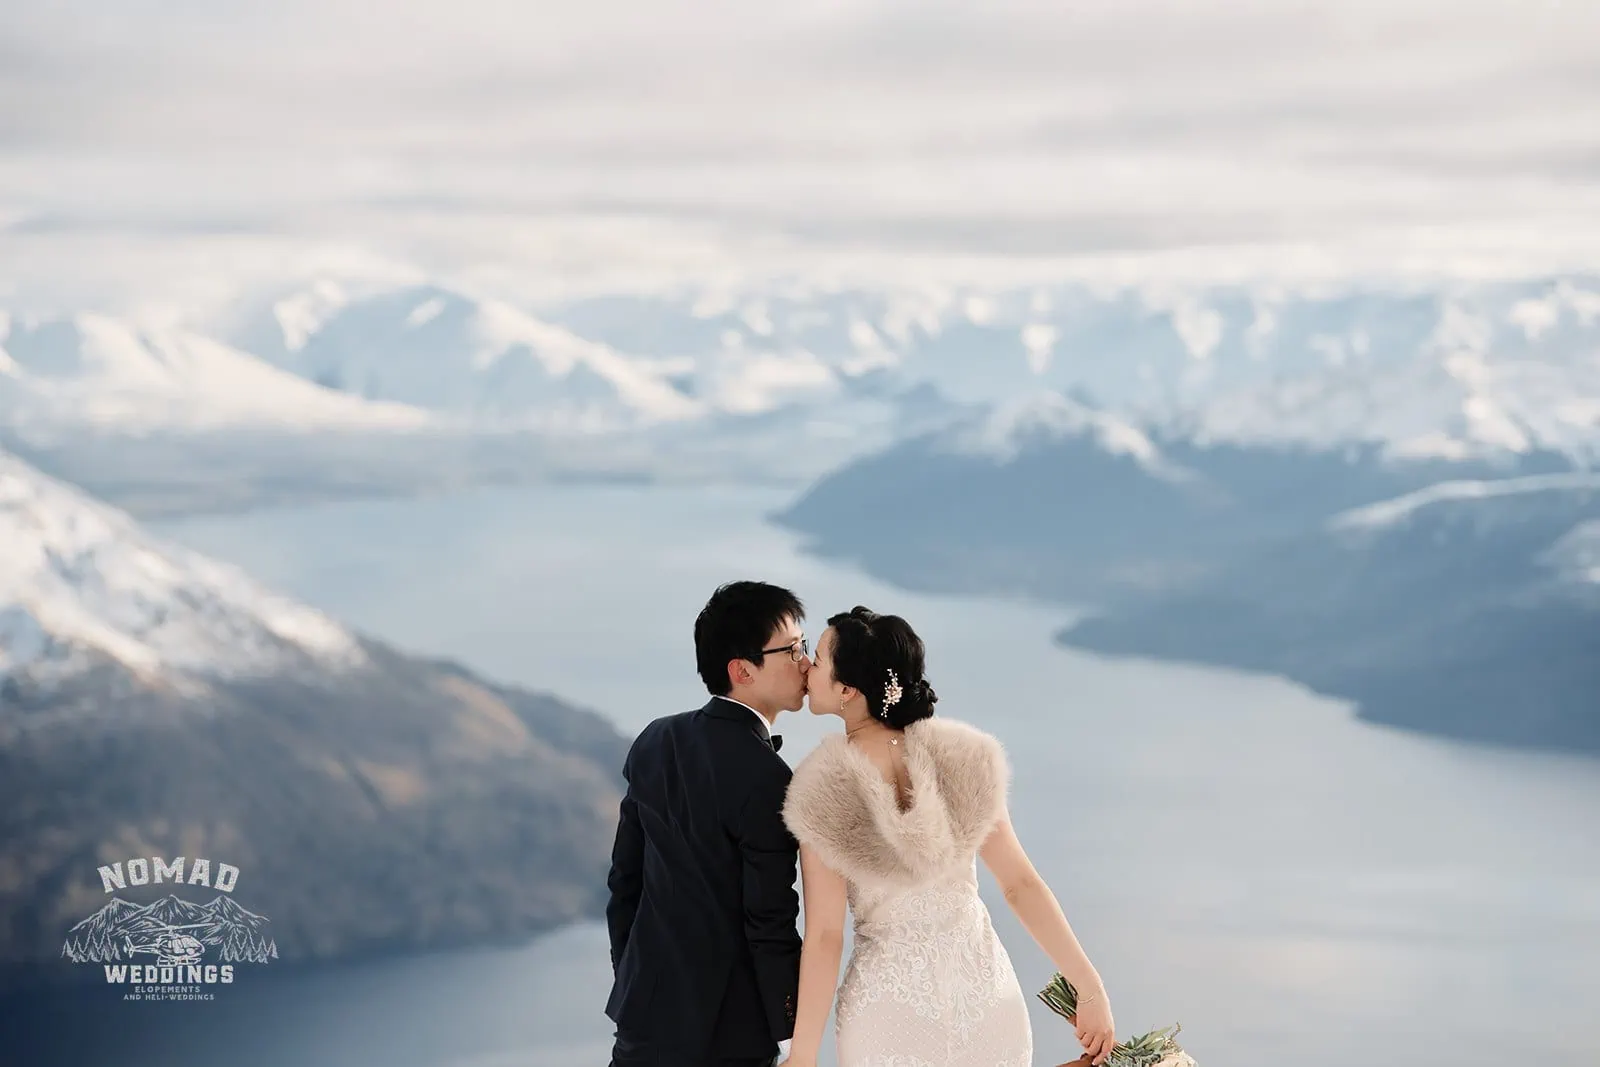 Joanna and Tony sharing a romantic moment during their pre-wedding shoot atop Queenstown's mesmerizing mountain with a panoramic view of Lake Wanaka.